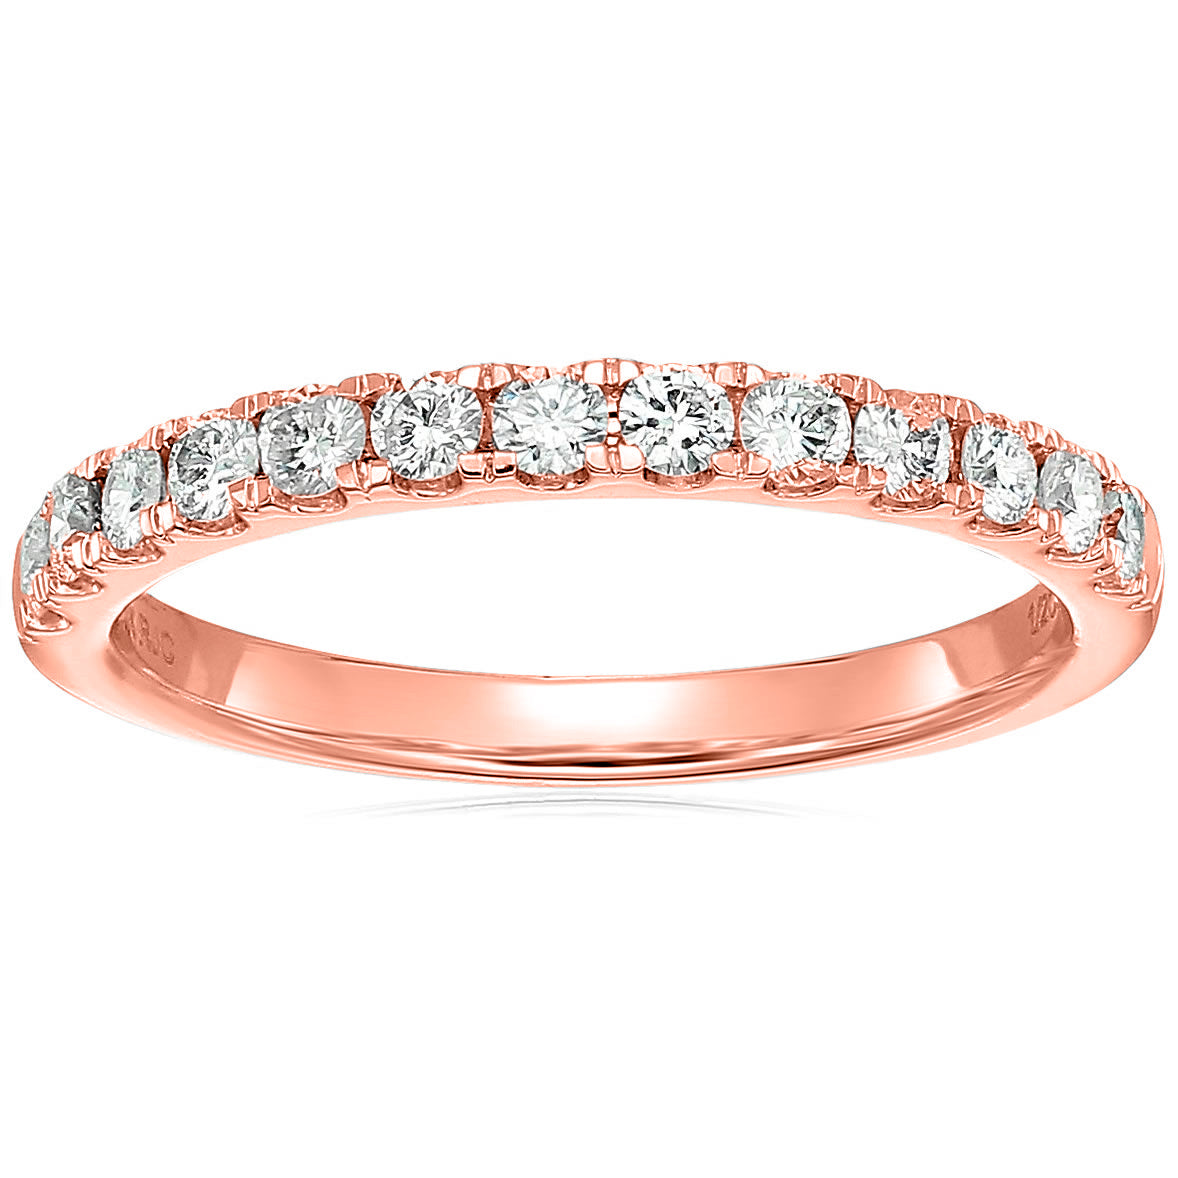 1/2 cttw Round Diamond Wedding Band for Women in 14K Rose Gold 13 Stones Prong Set, Size 4.5-10